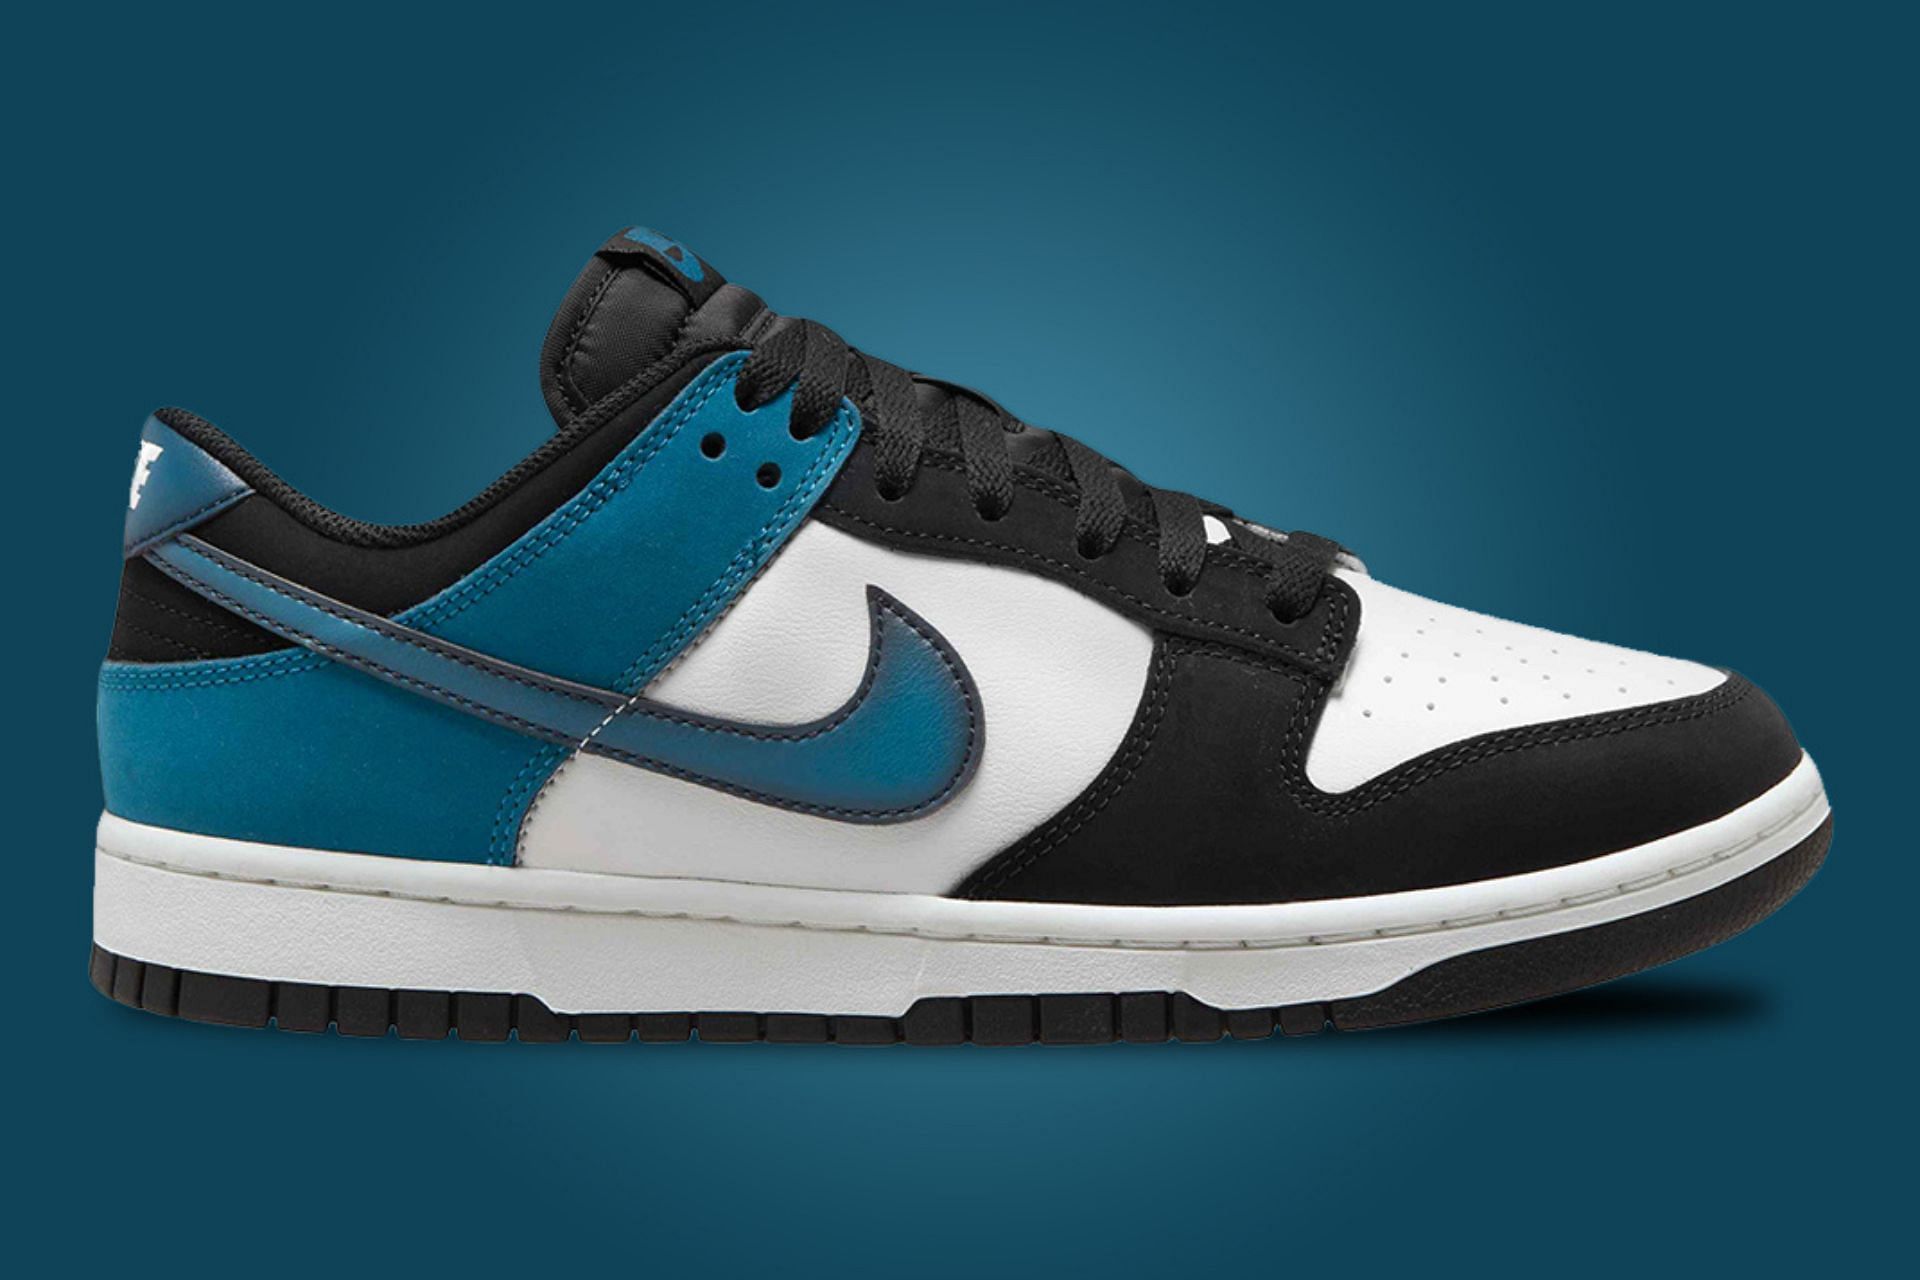 Arena Seguir clase Nike Dunk Low “Black Industrial Blue” shoes: Where to buy, price, and more  details explored